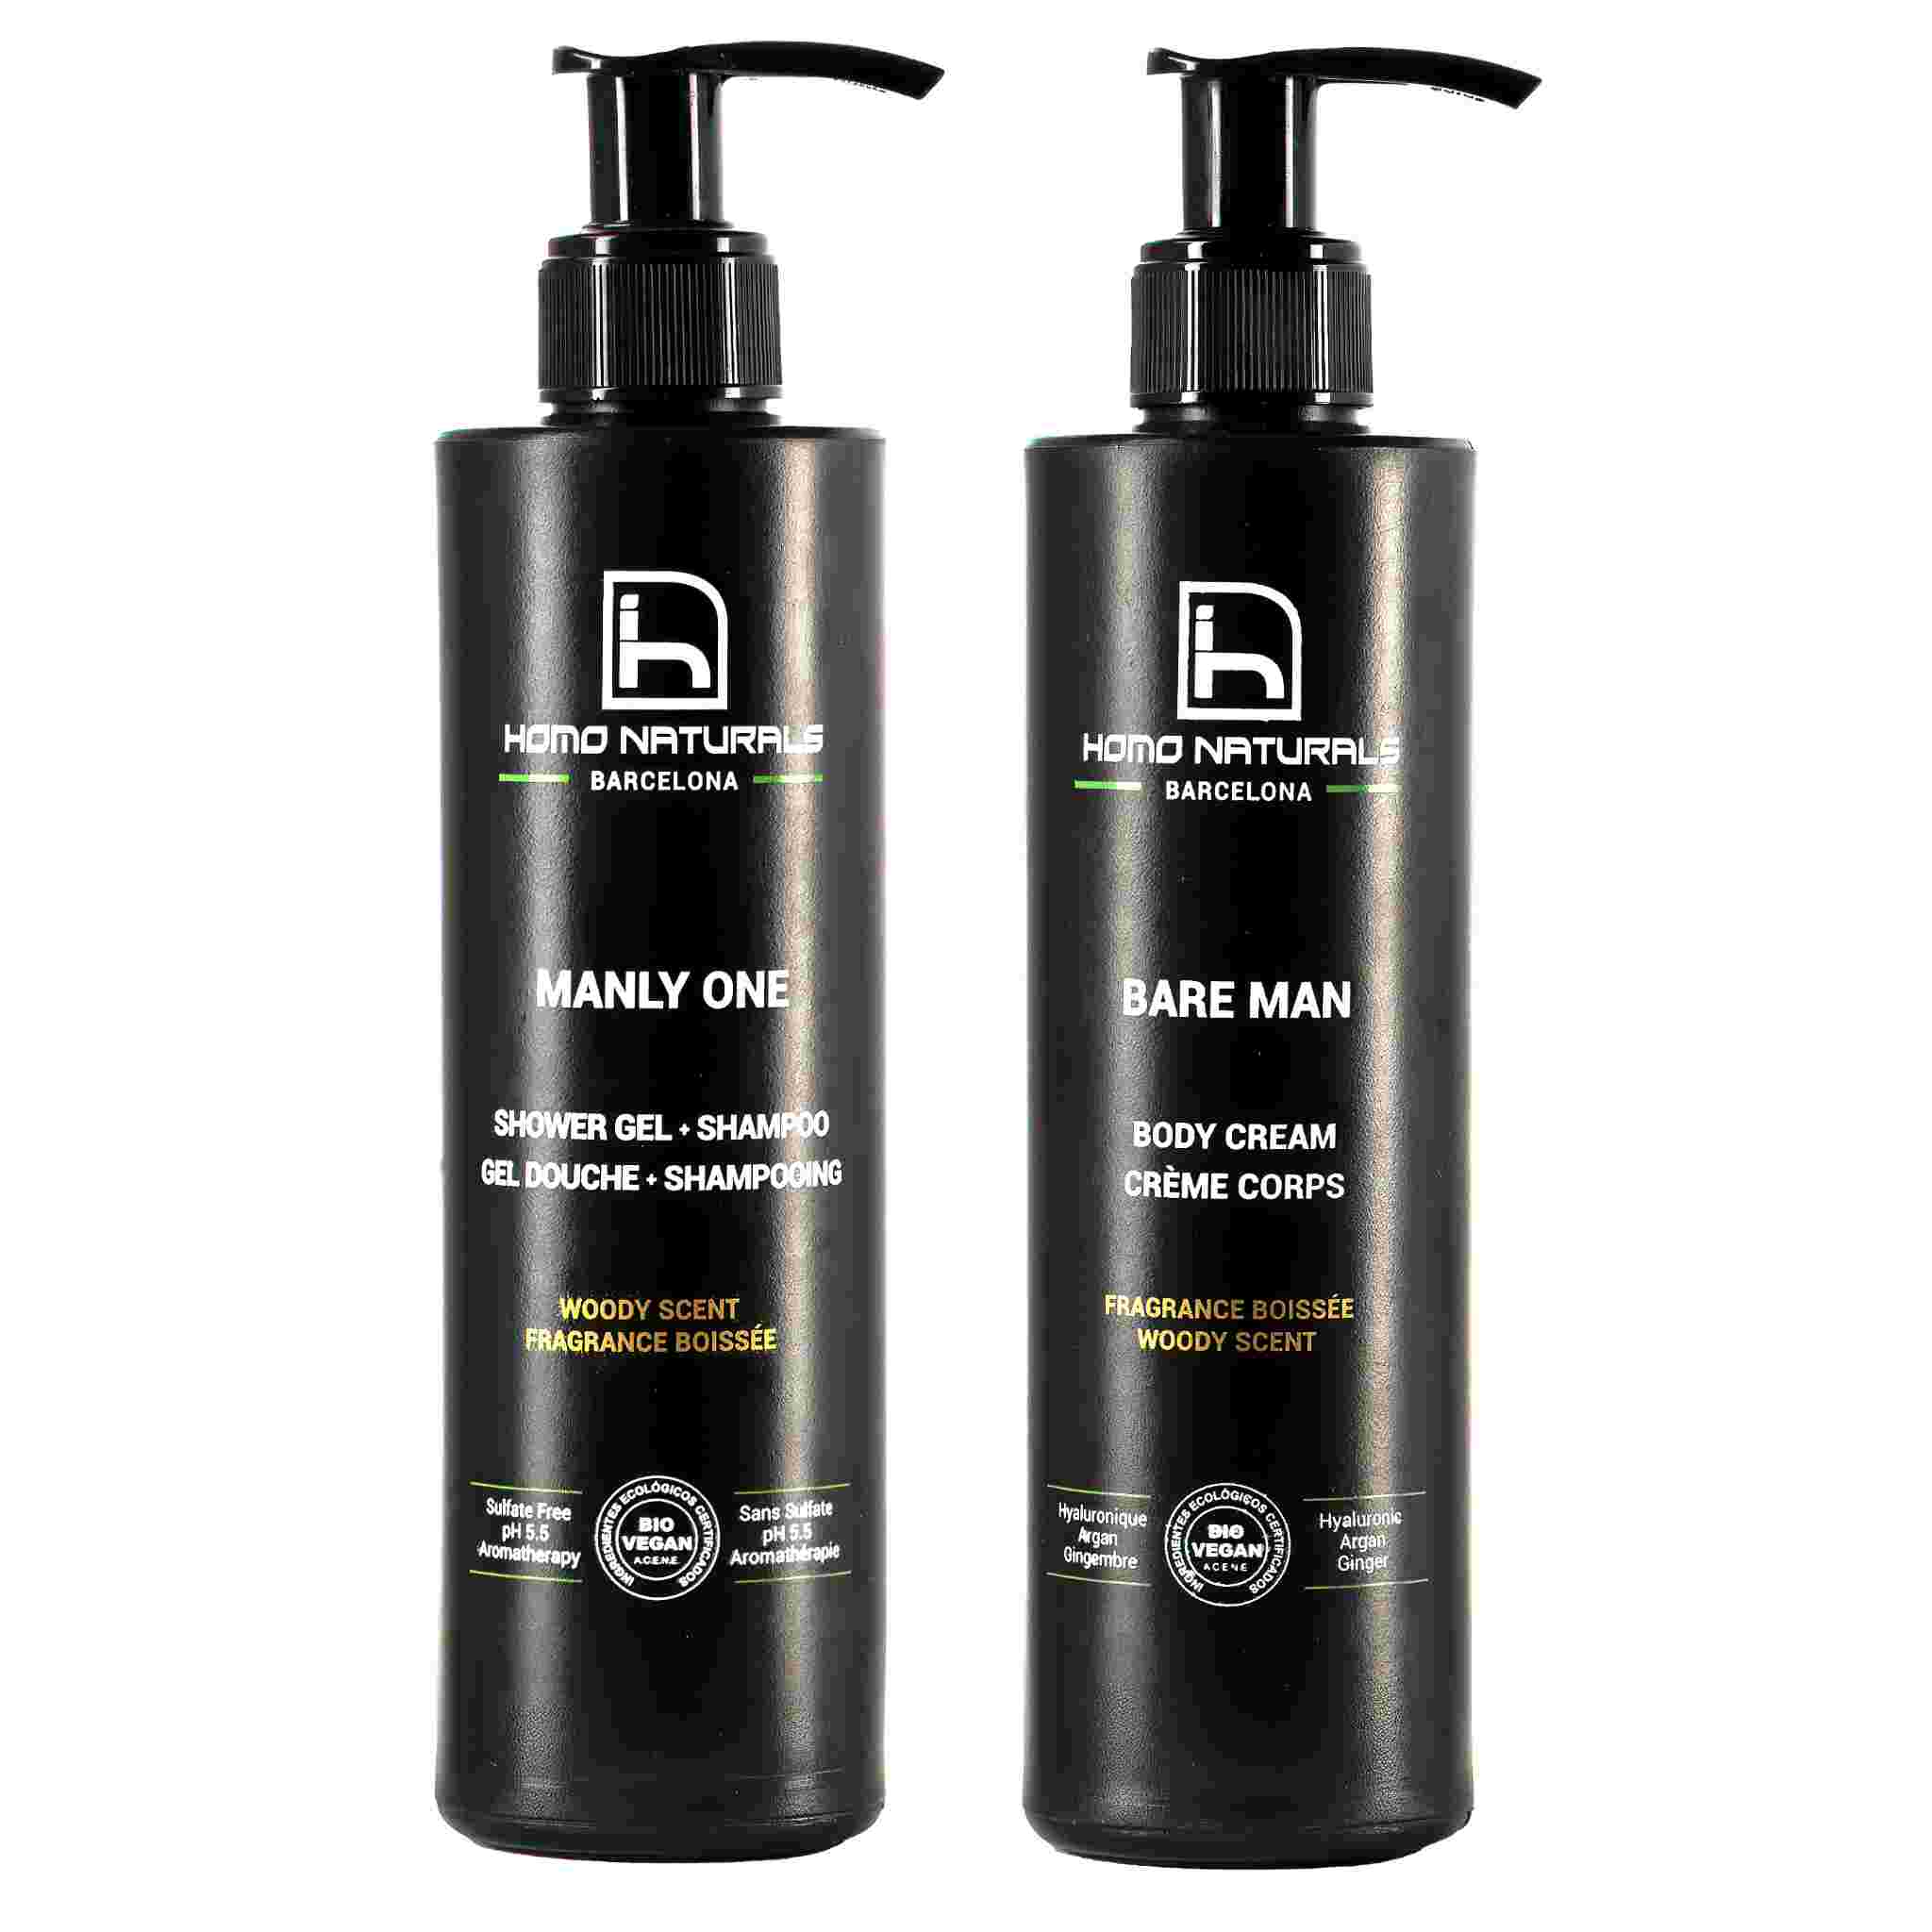 Shower gel and body cream kit for men. Natural and organic body care products for men